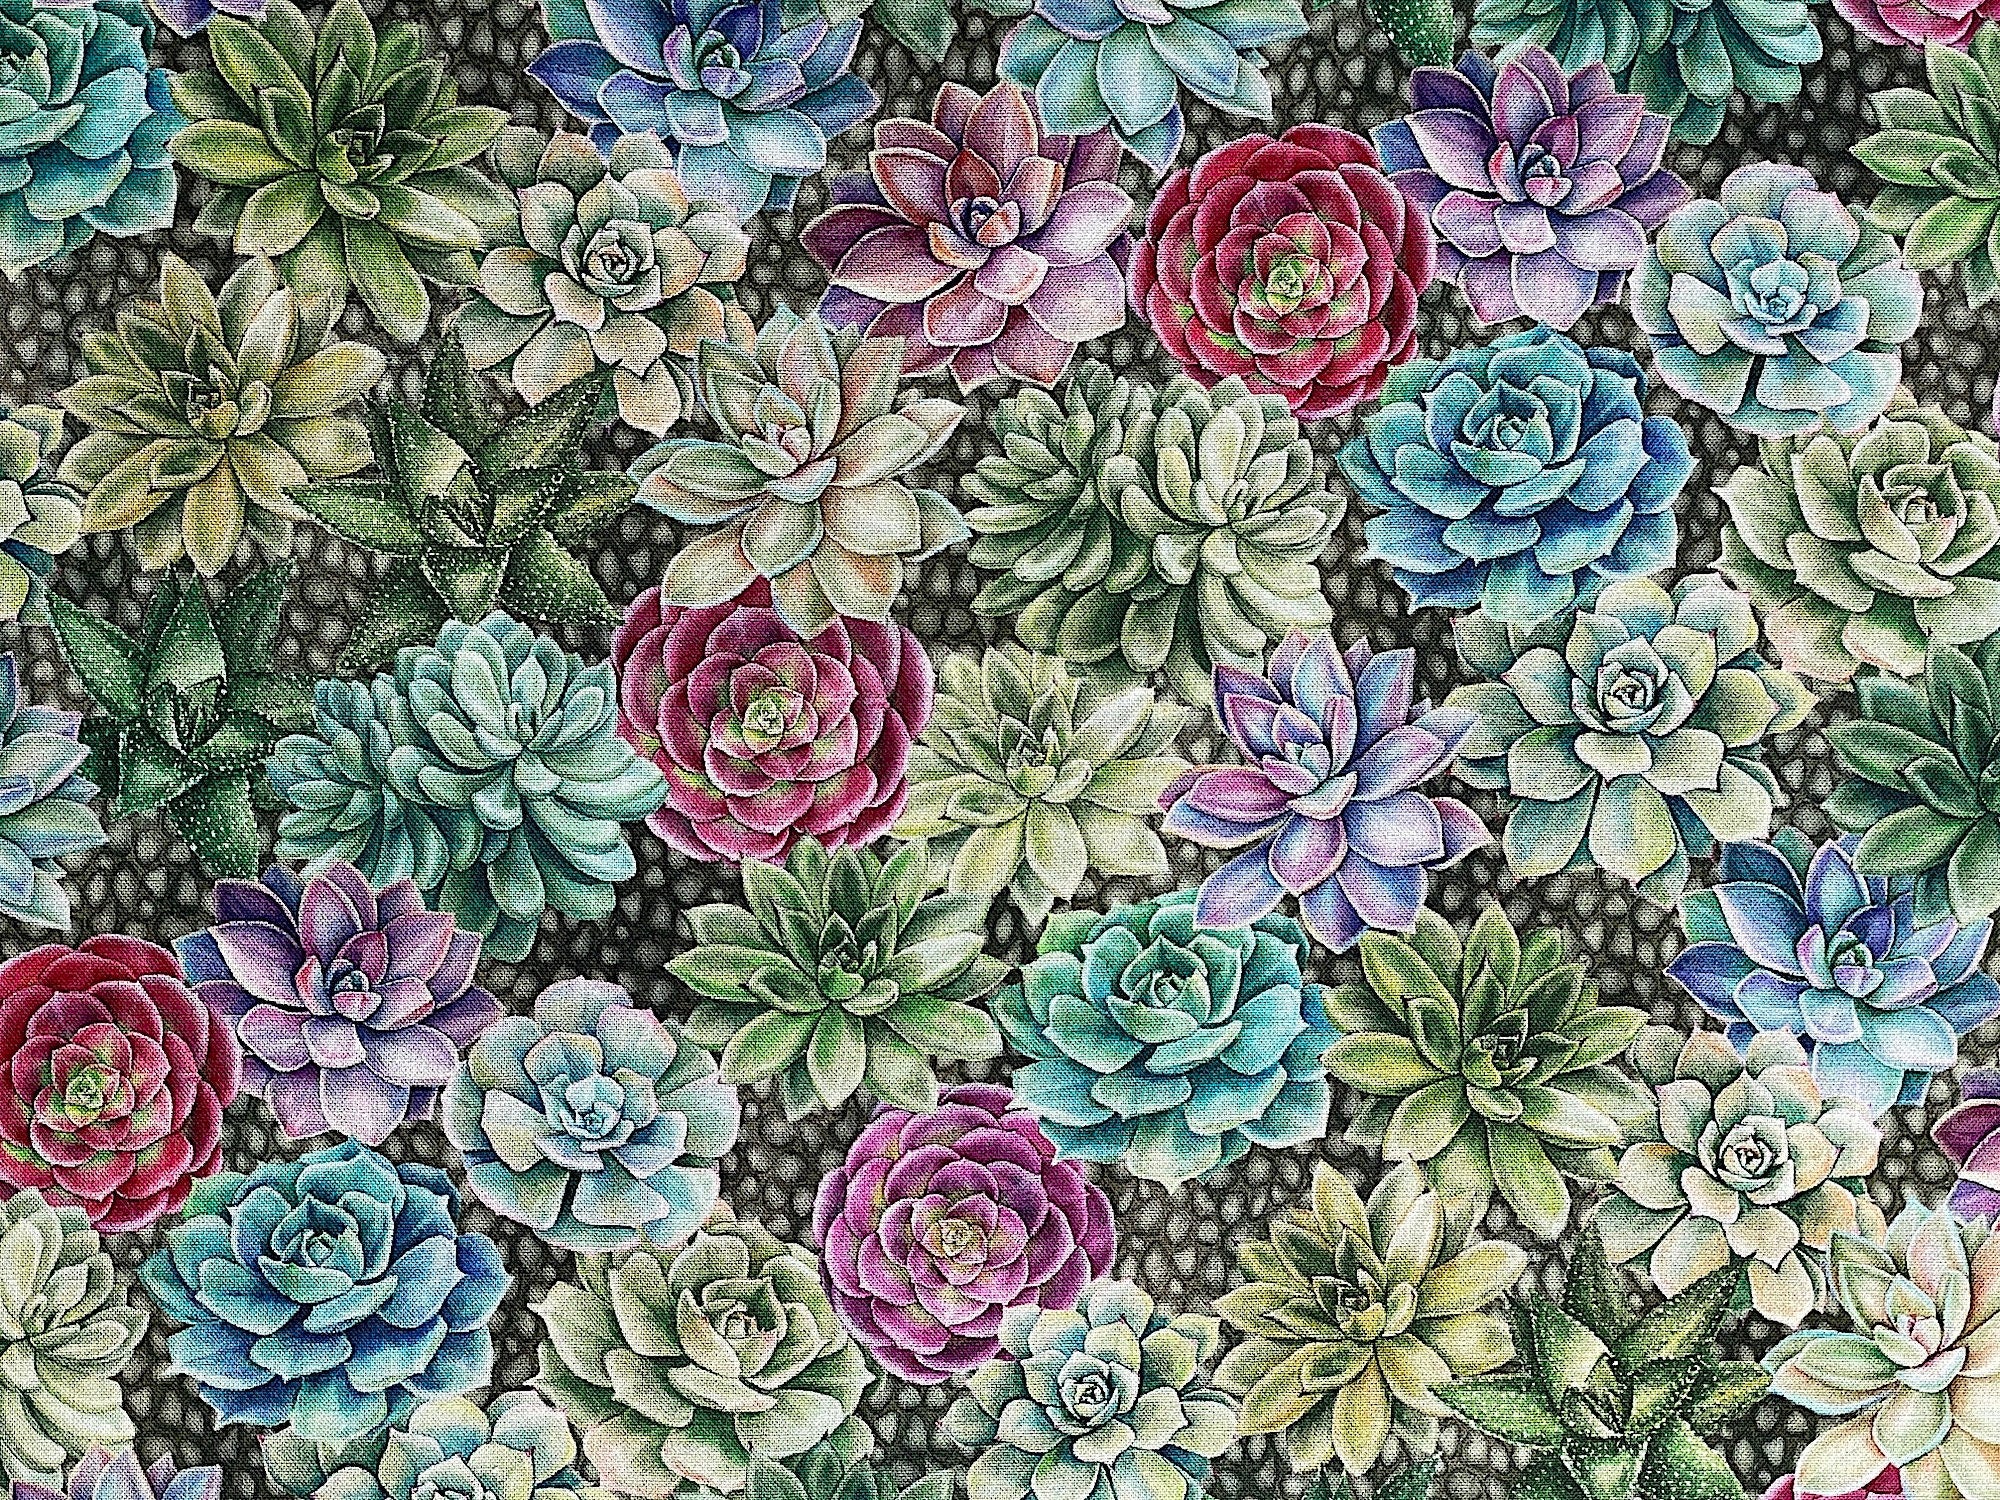 Cotton fabric that is covered with succulents that are  shades of green, blue, red and pink